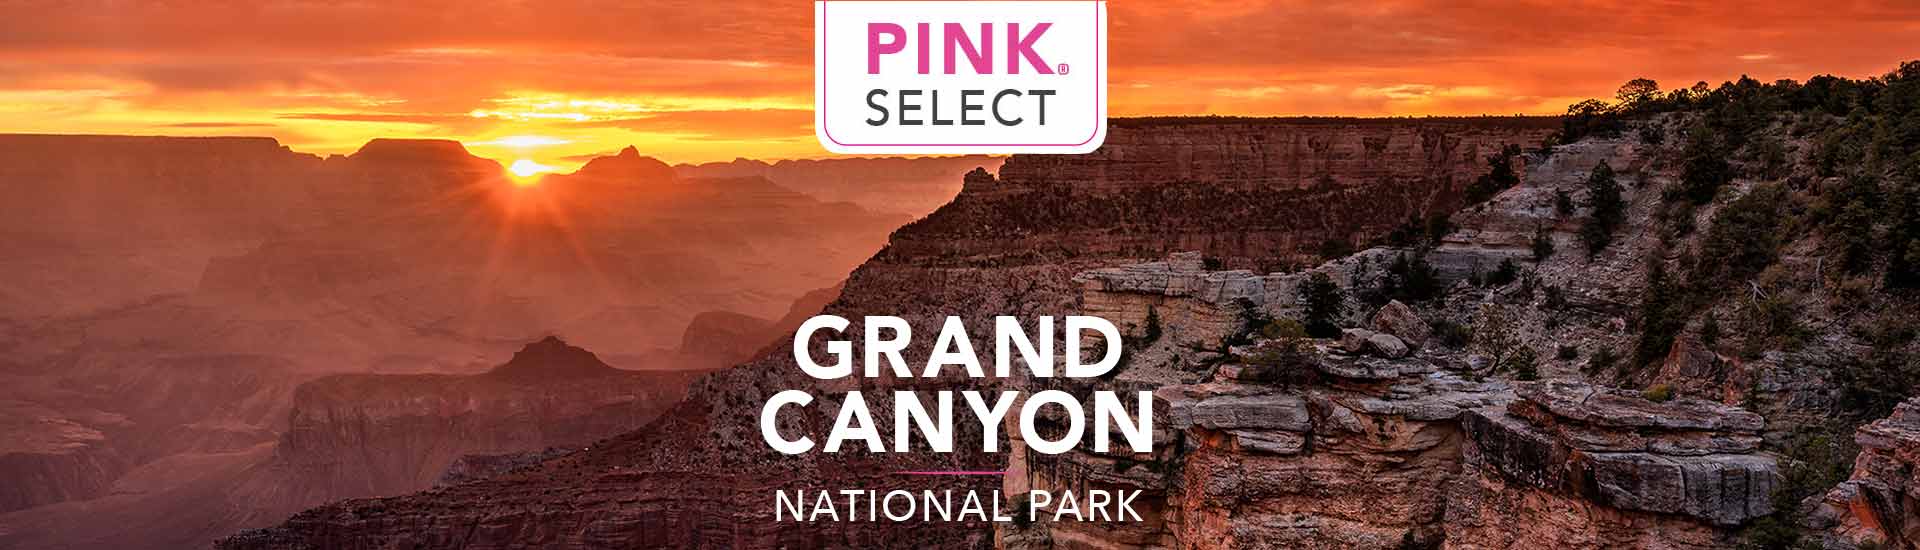 Pink Select Grand Canyon South Rim premium journey header image with logo.